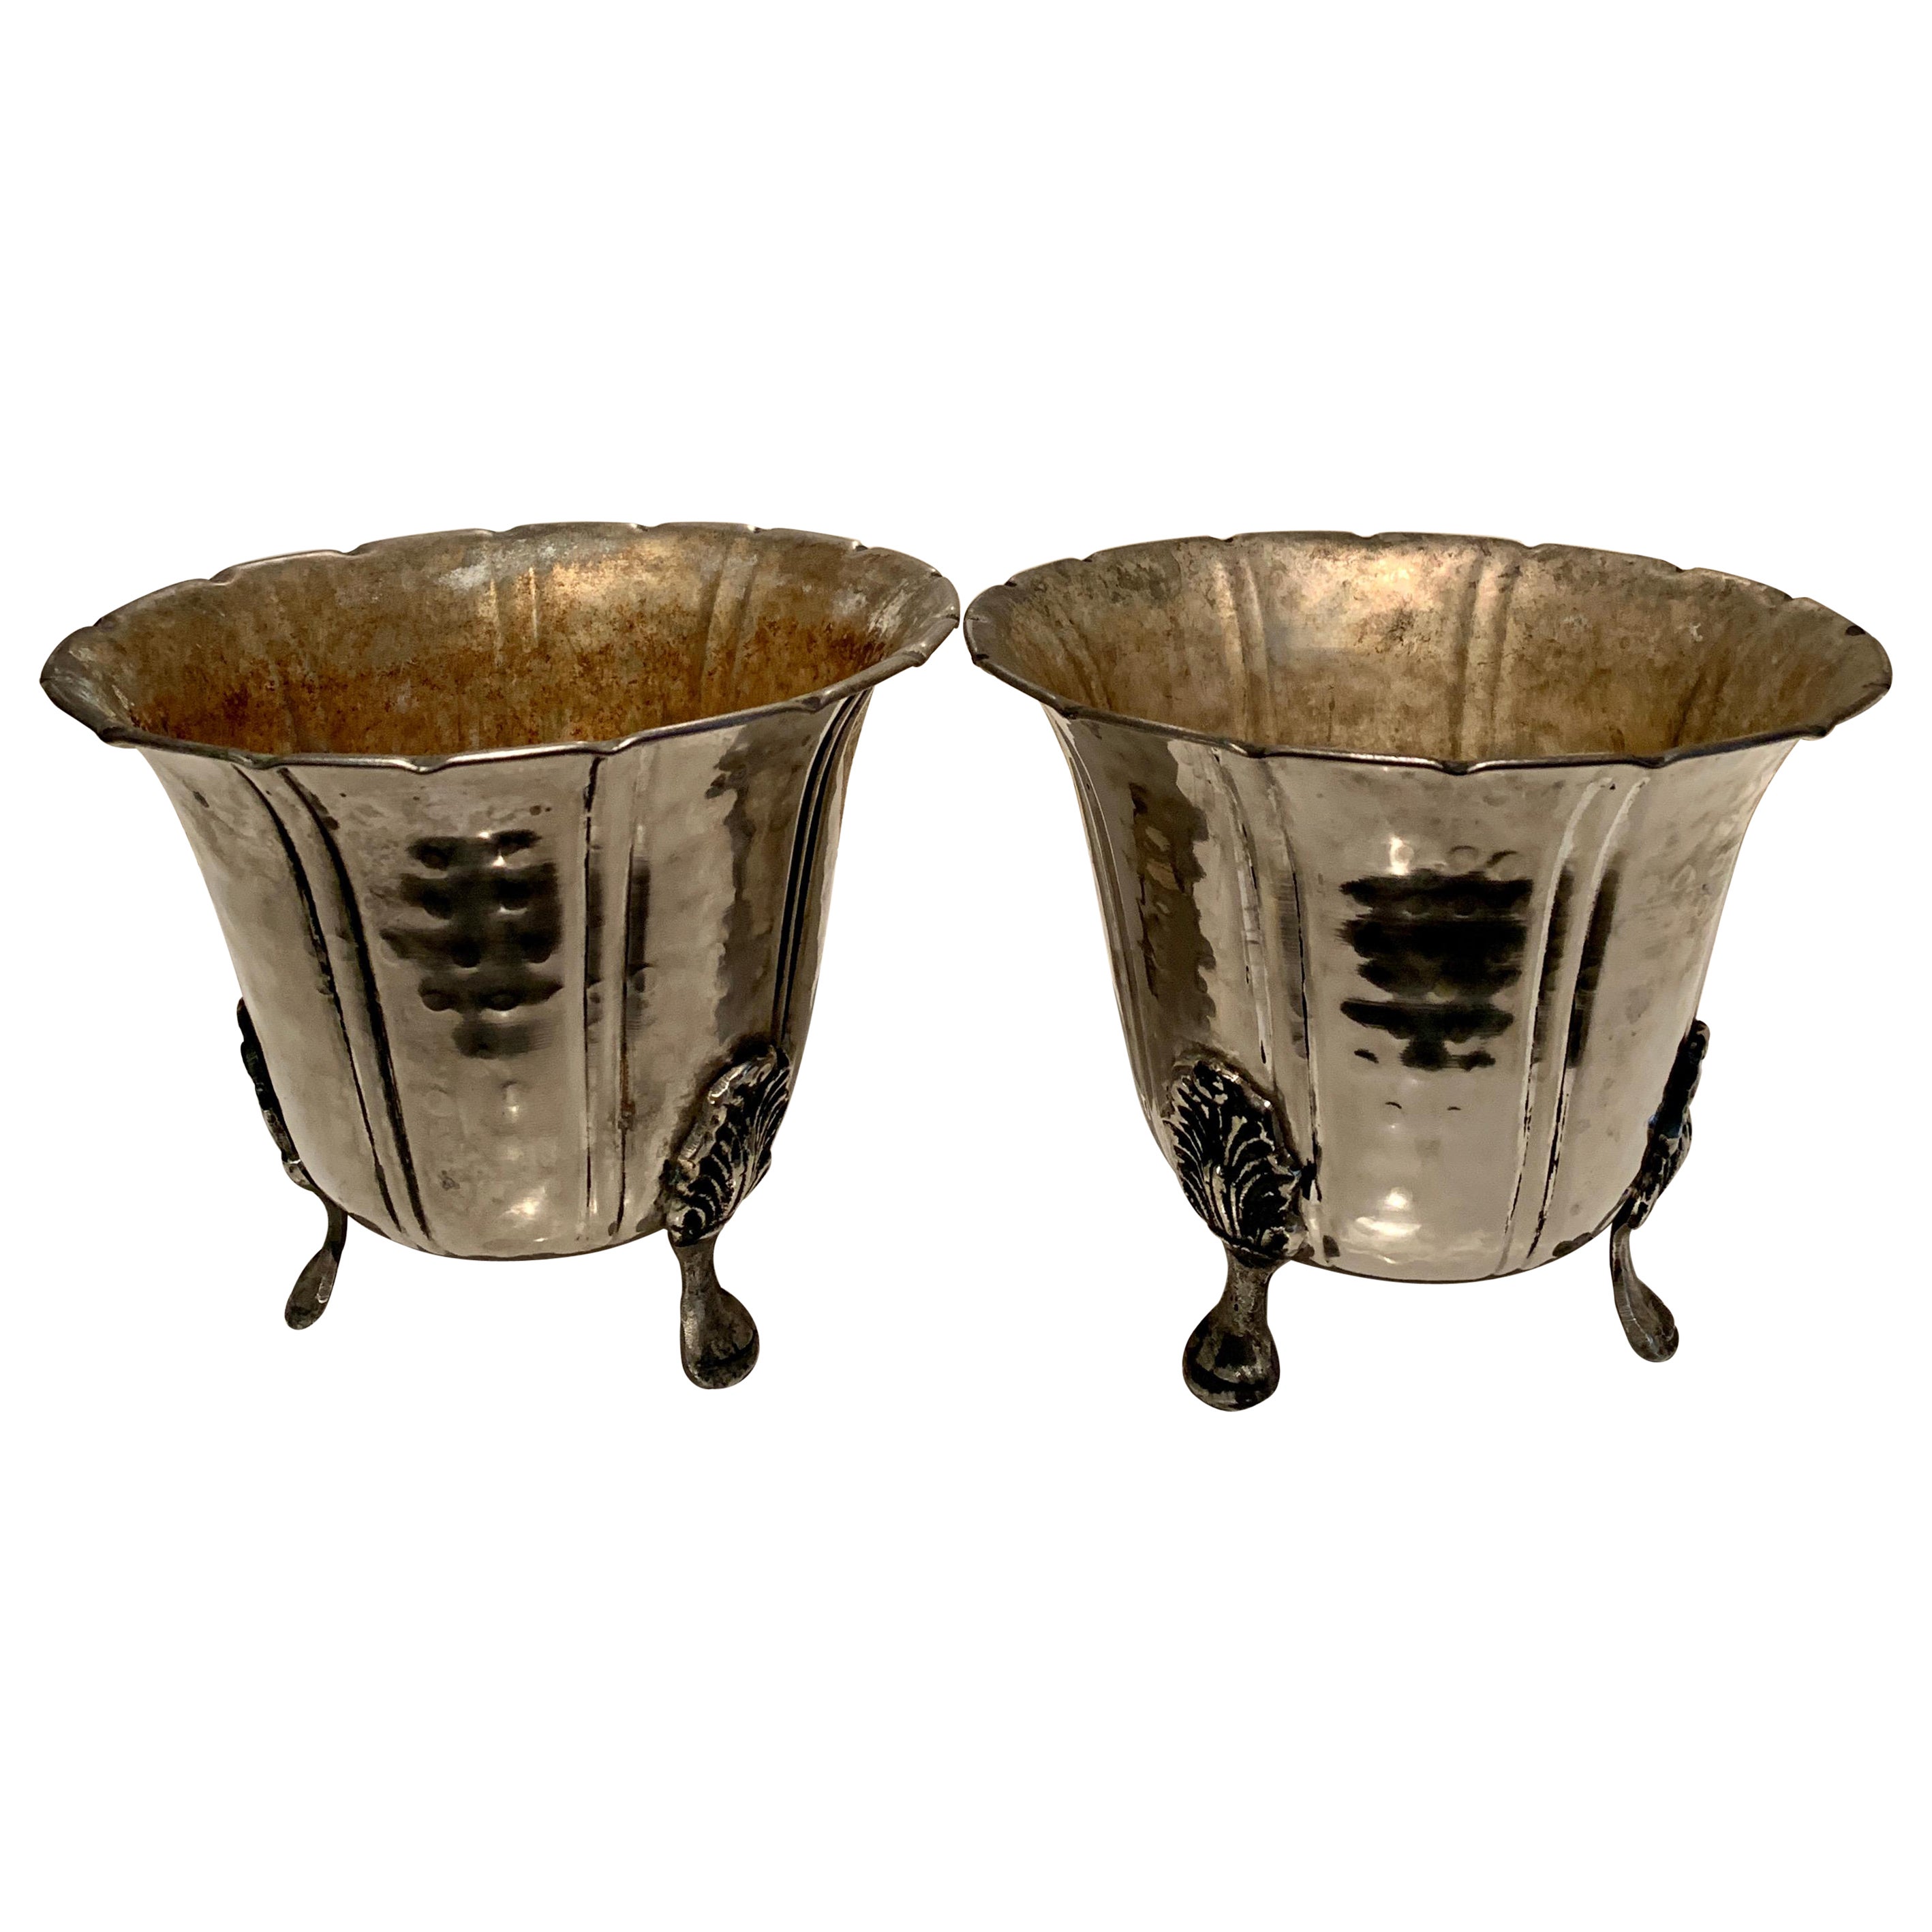 Pair of French Footed Hammered Silver Planters